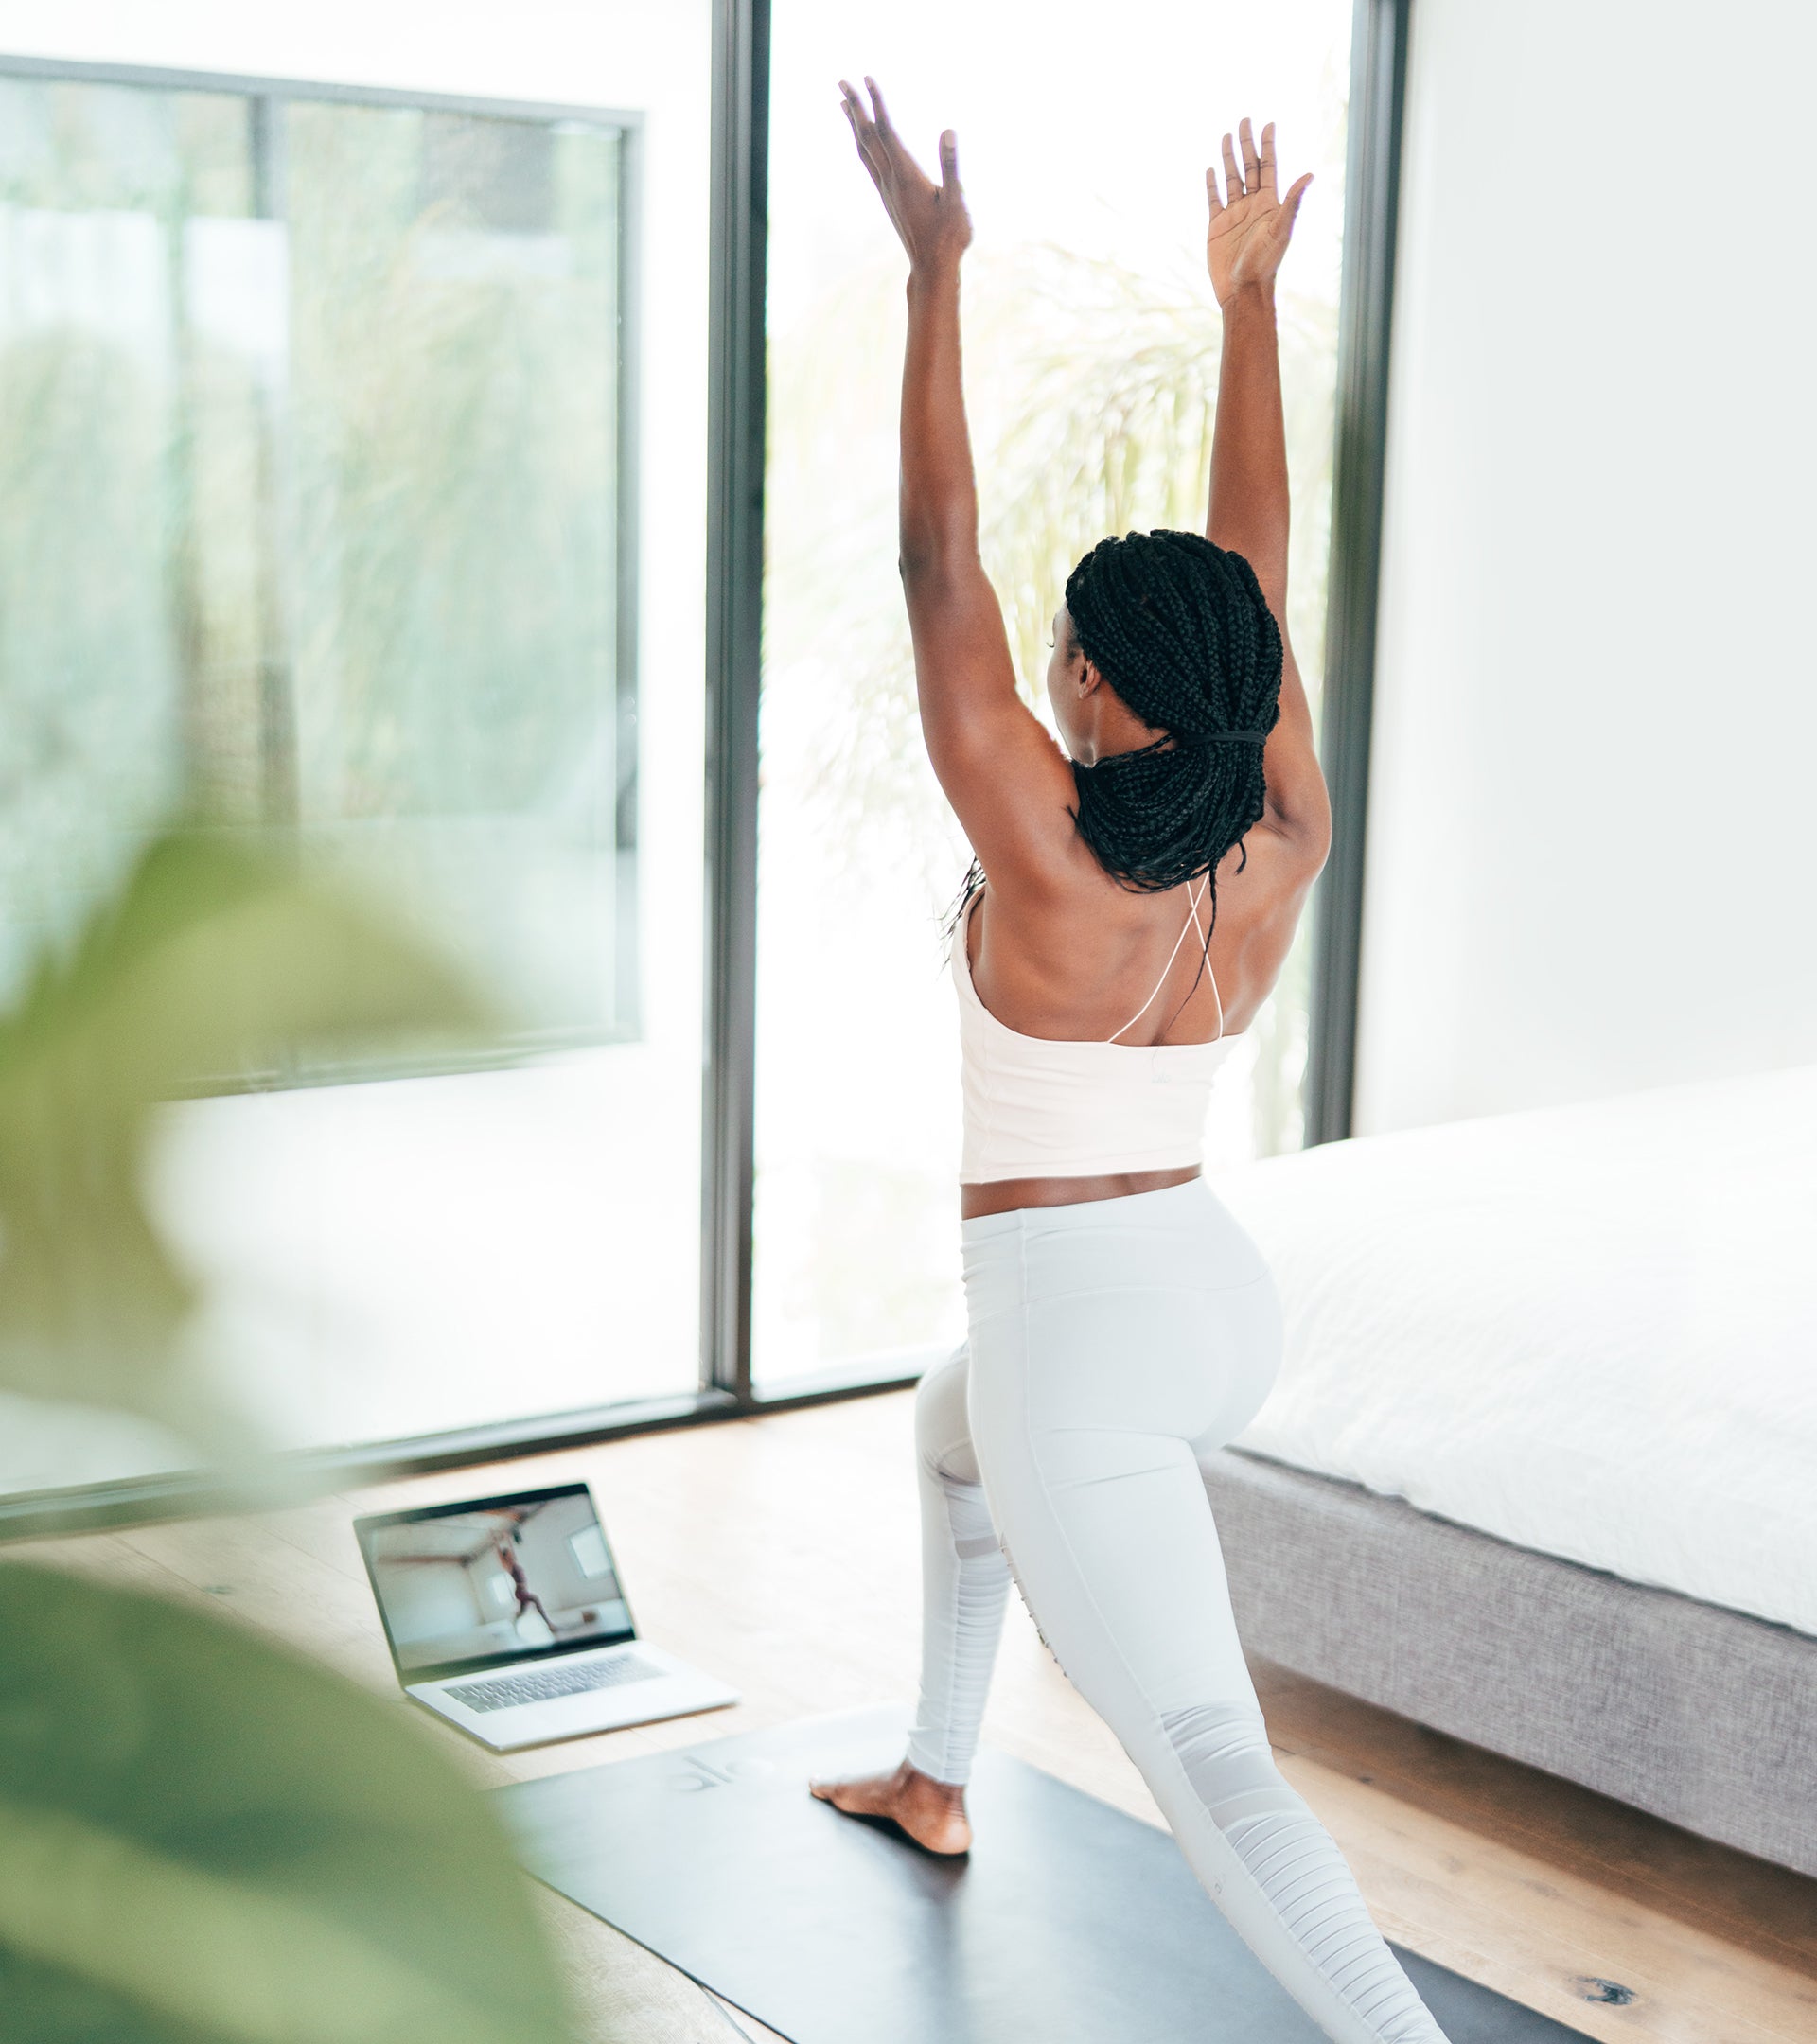 How Alo Yoga Built A Brand Synonymous with Yoga Across Owned